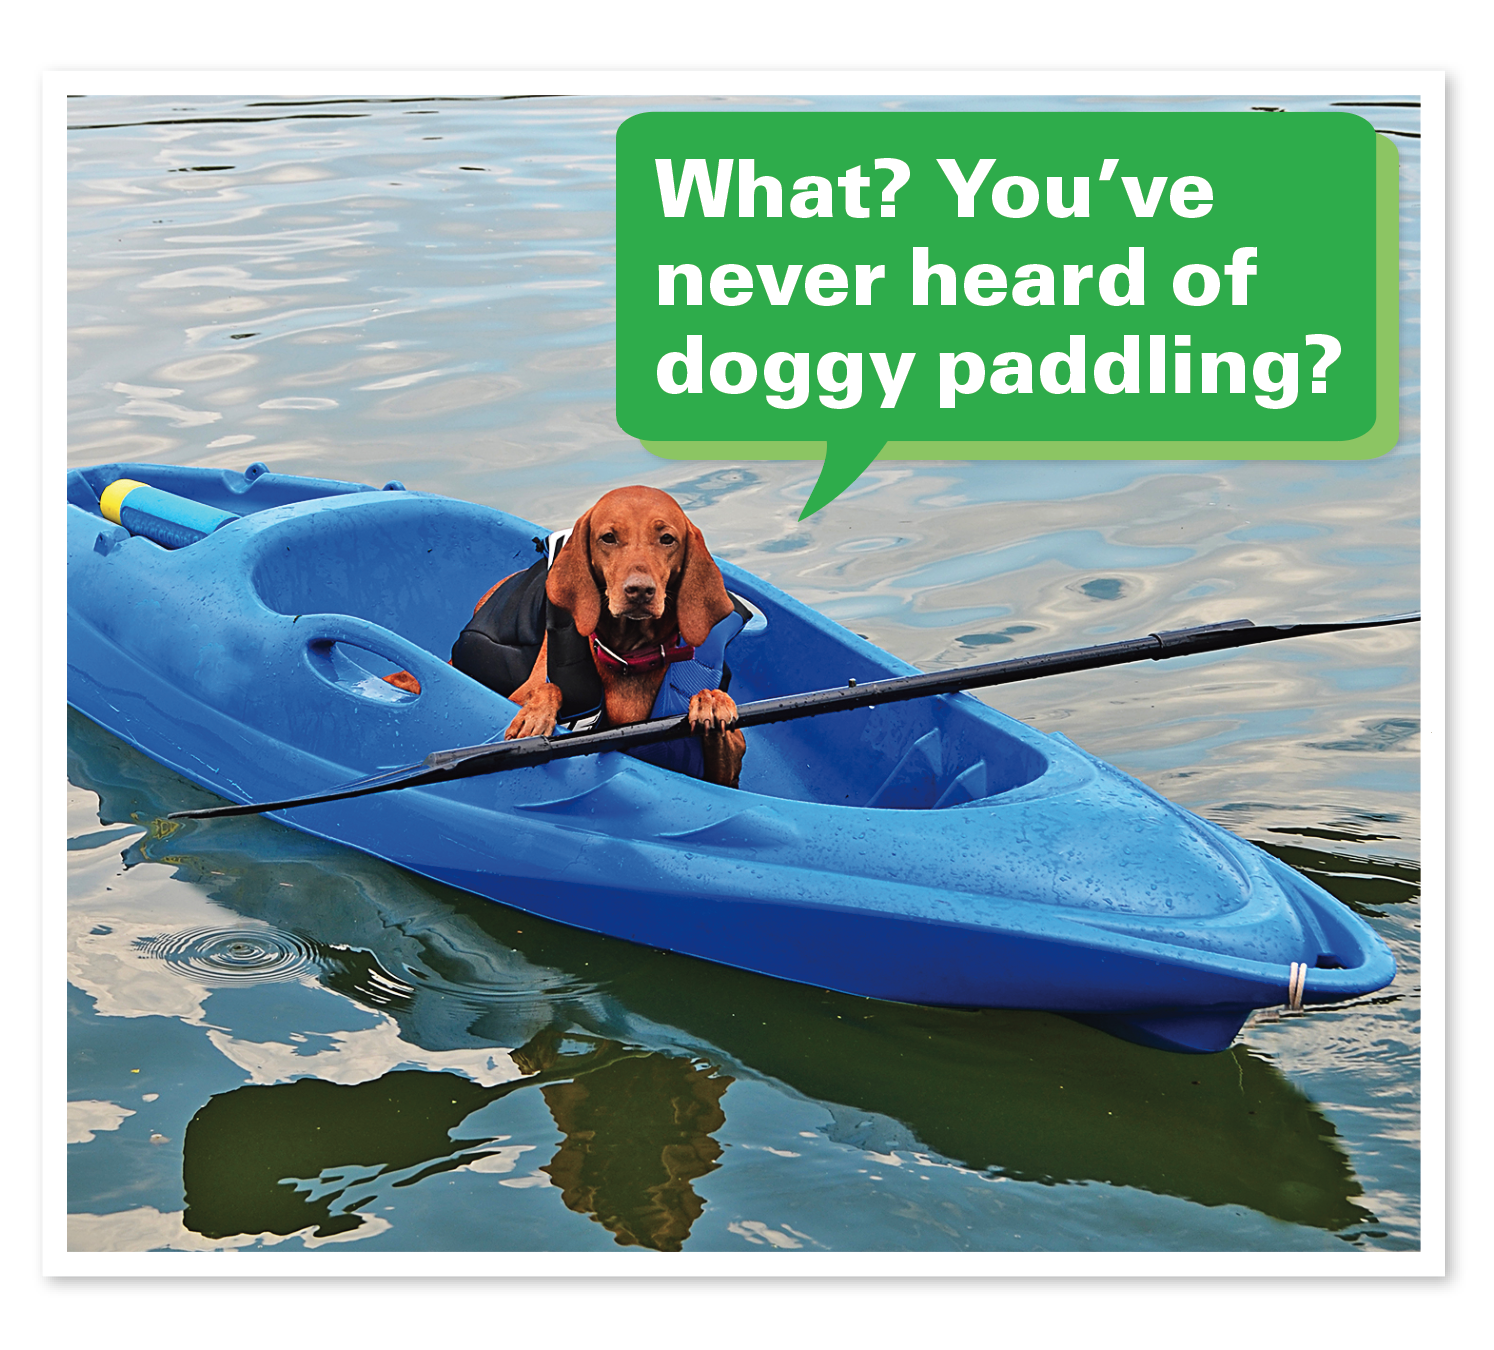 A dog jokes about the doggy paddle